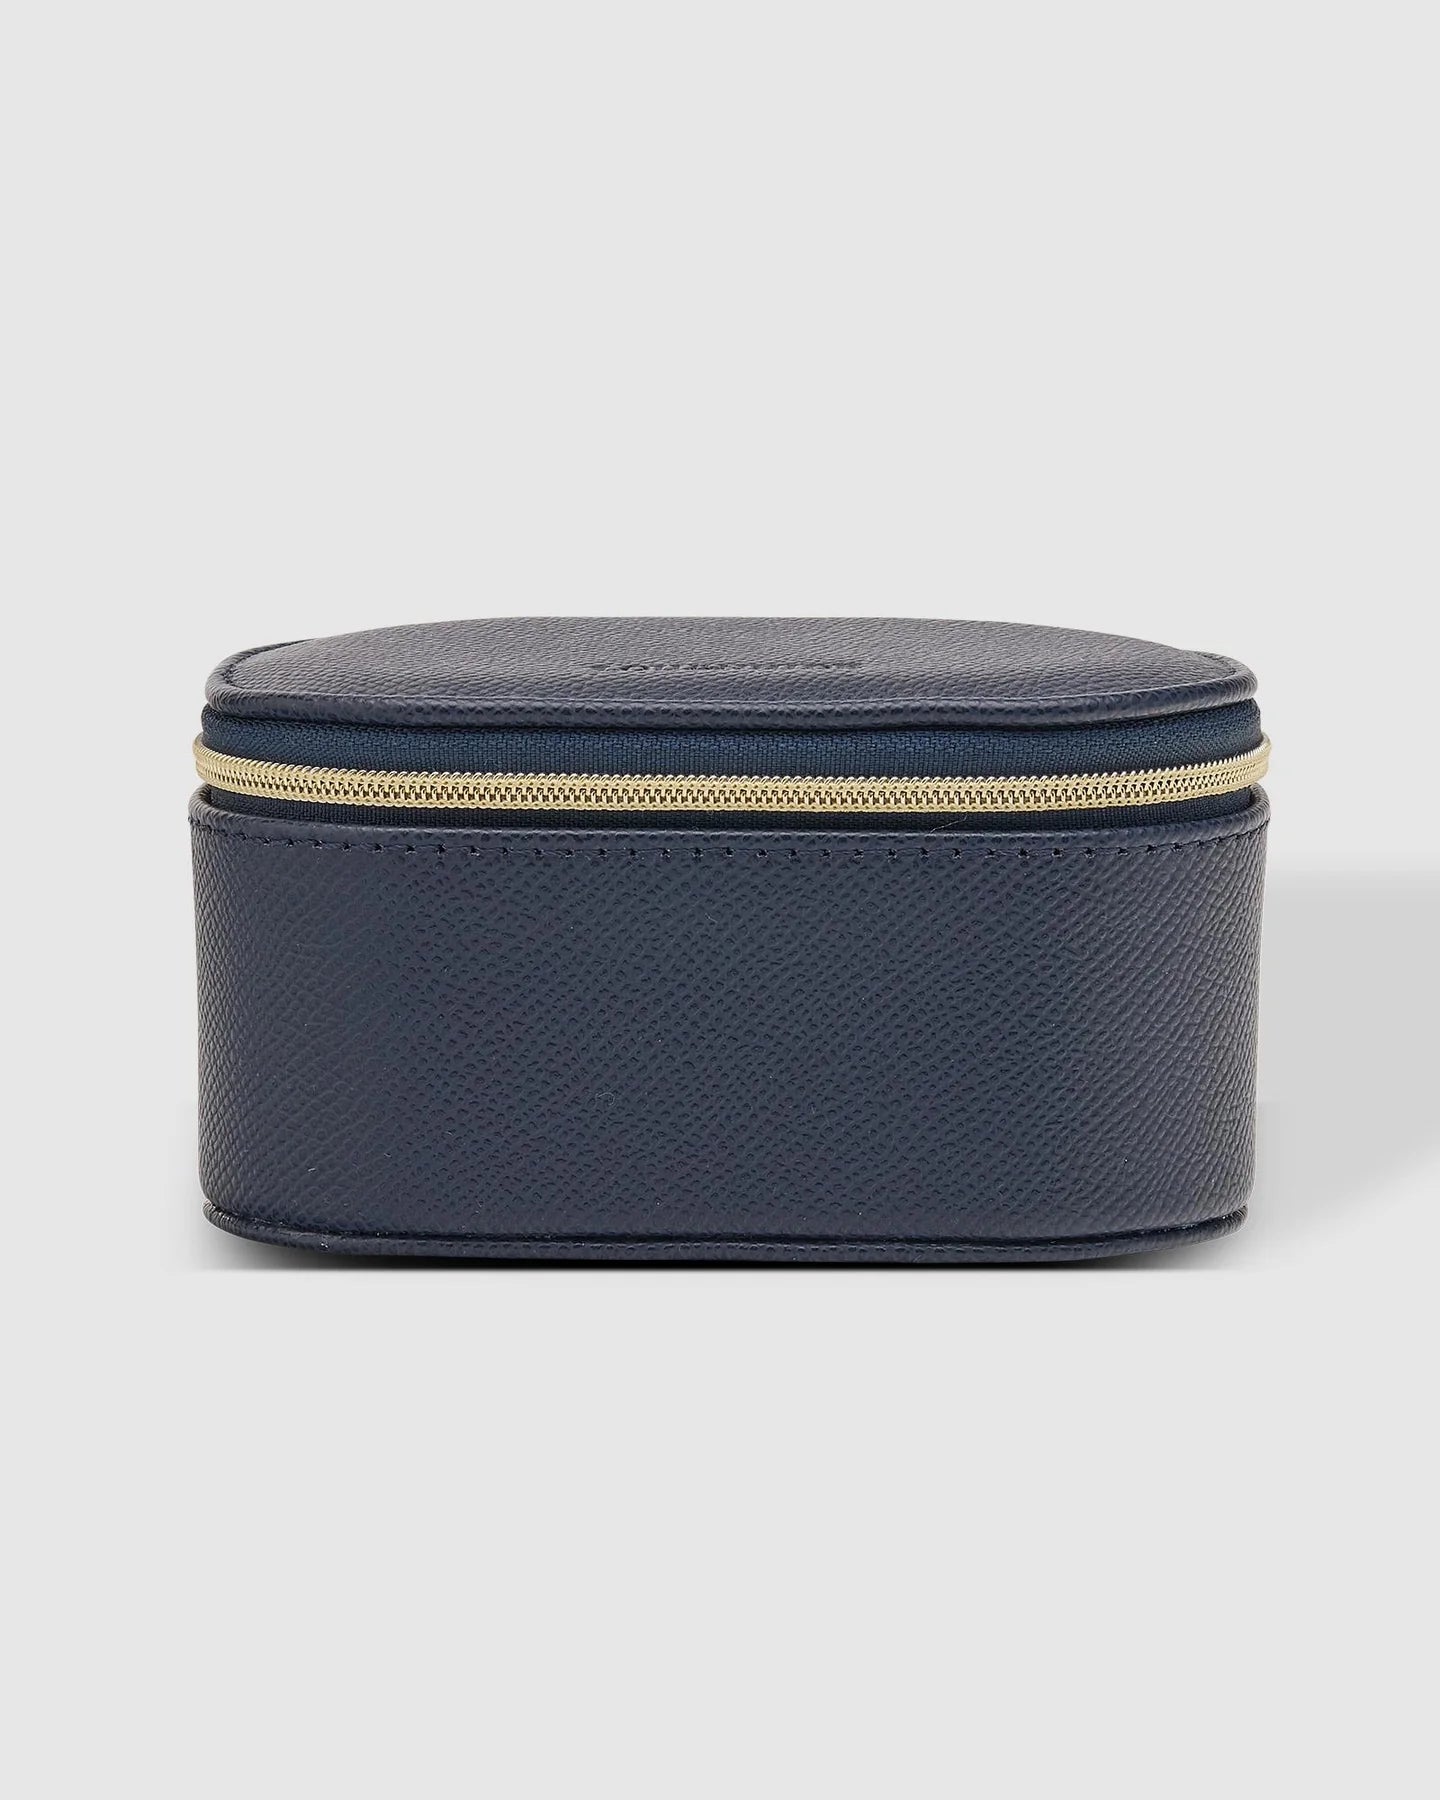 Olive Jewellery Box - Silver or Navy